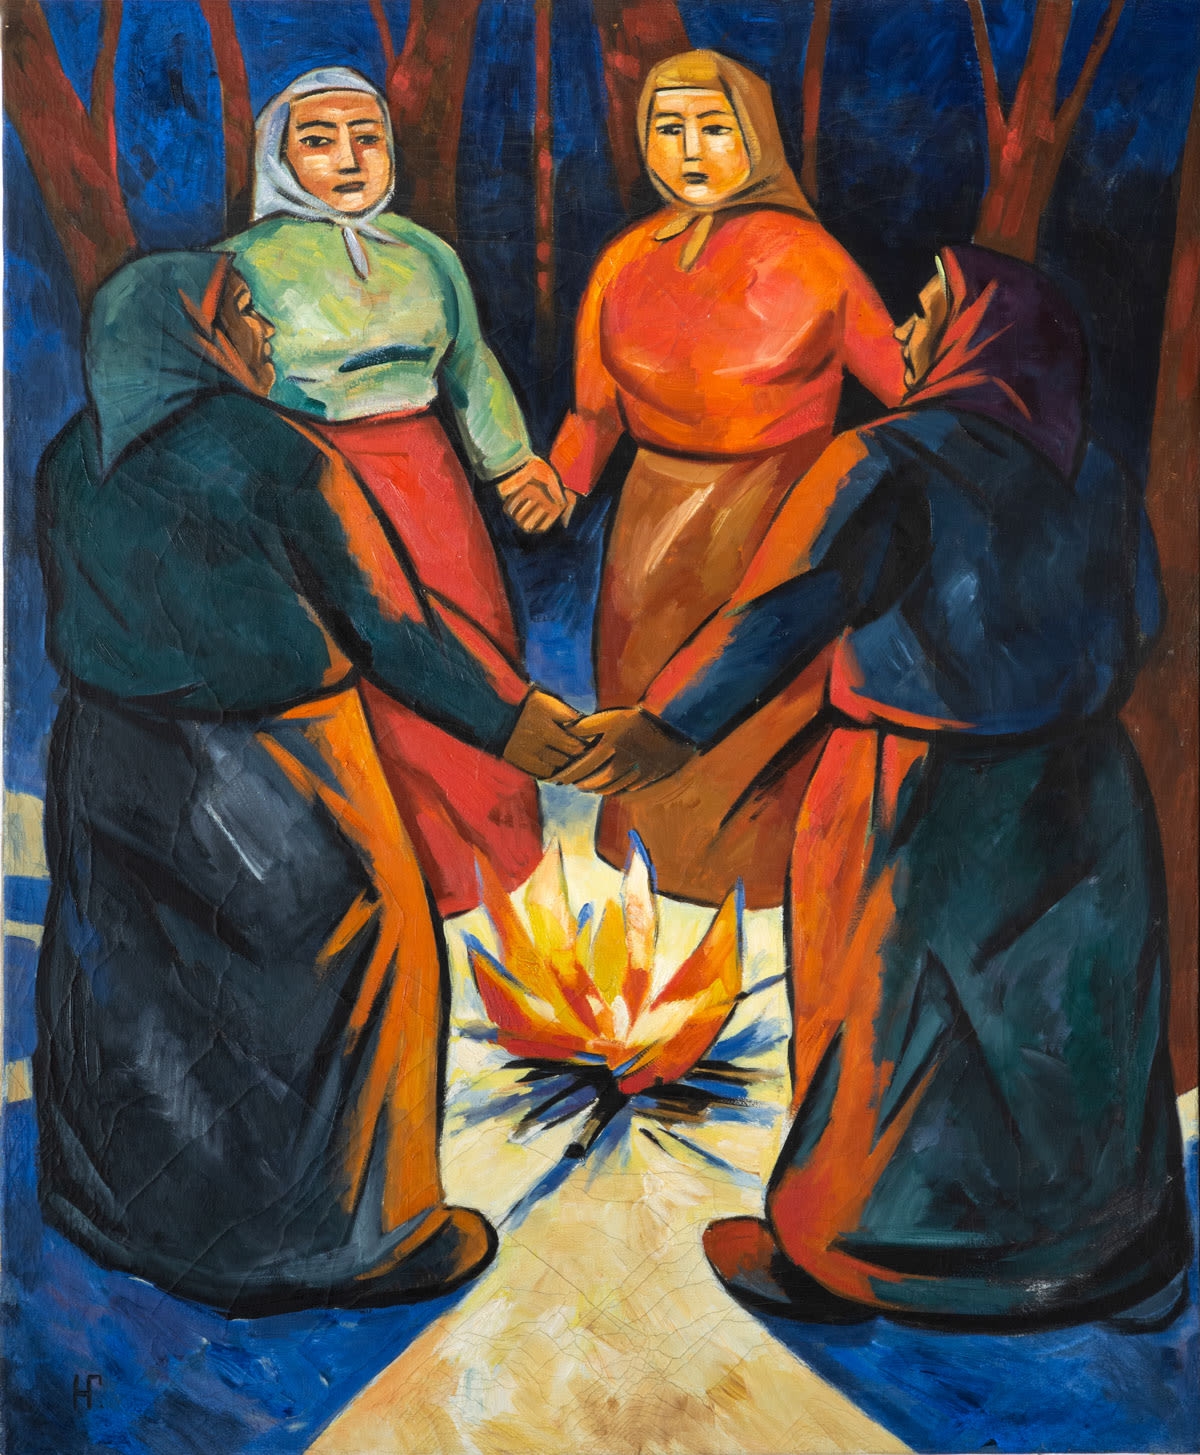 Artwork by Natalia Goncharova, Around the Fire, Made of Oil on canvas